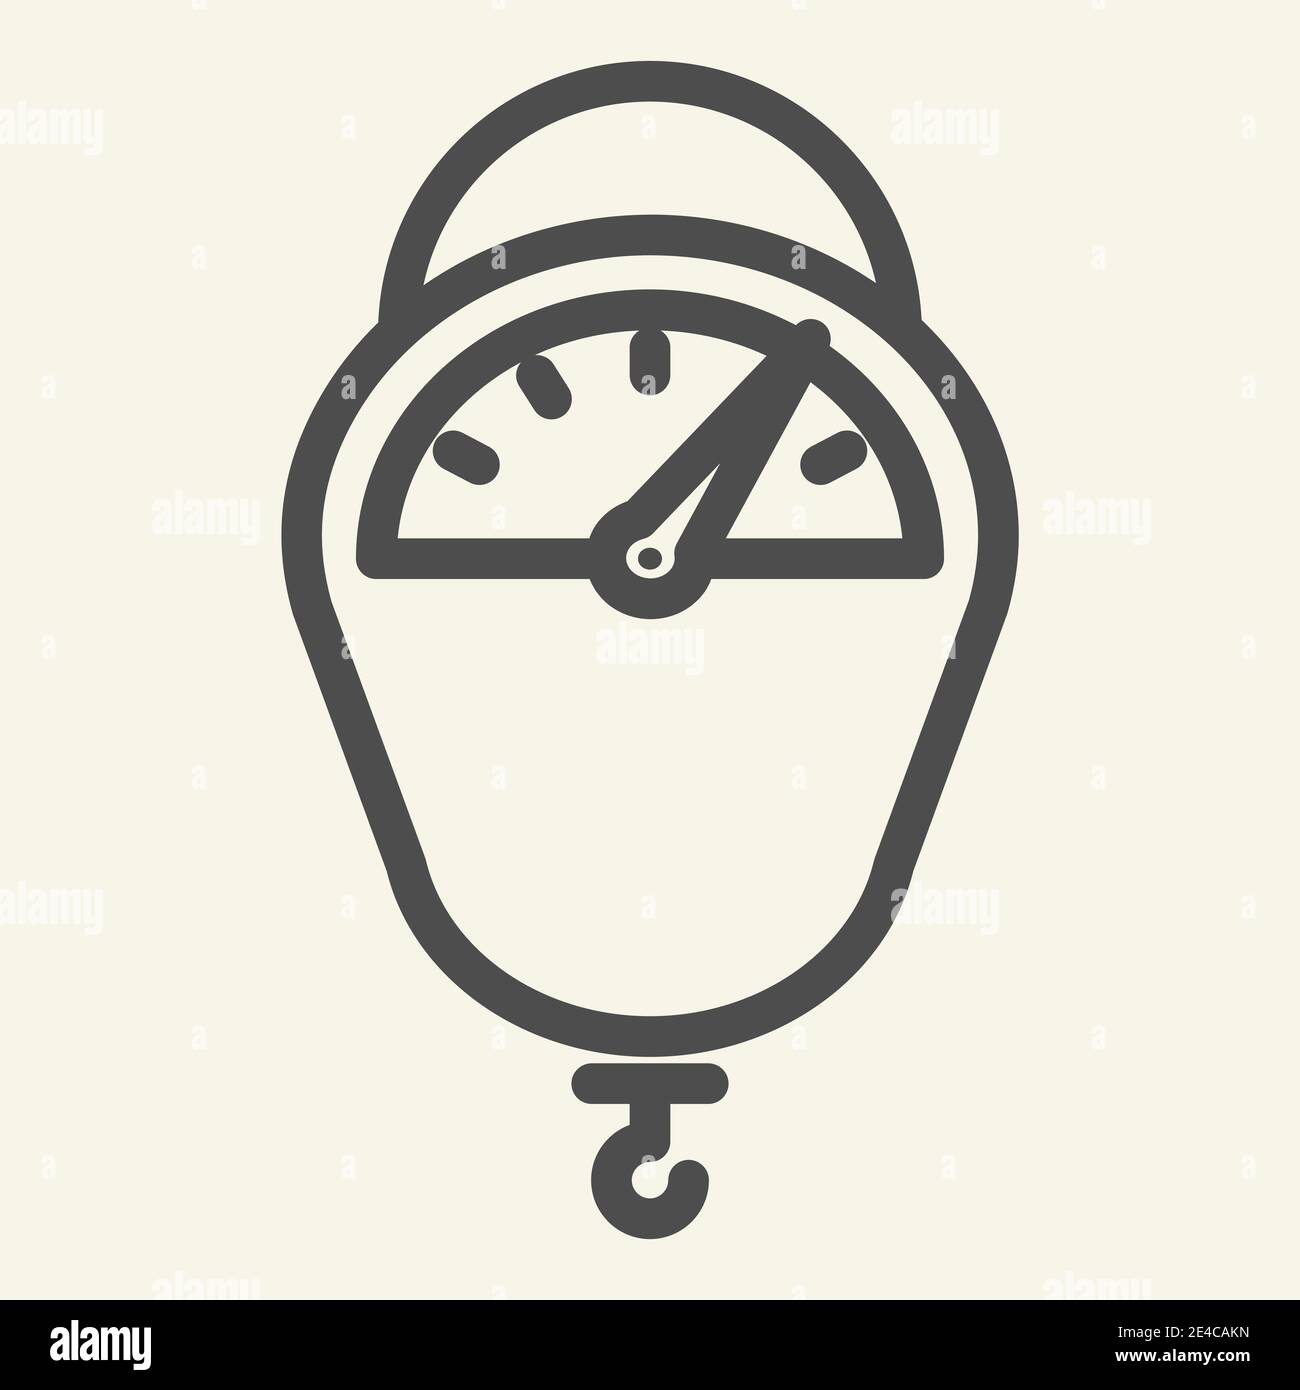 https://c8.alamy.com/comp/2E4CAKN/hanging-scale-line-icon-kitchen-scales-tool-symbol-outline-style-pictogram-on-beige-background-hanging-weight-scale-with-hook-sign-for-mobile-2E4CAKN.jpg